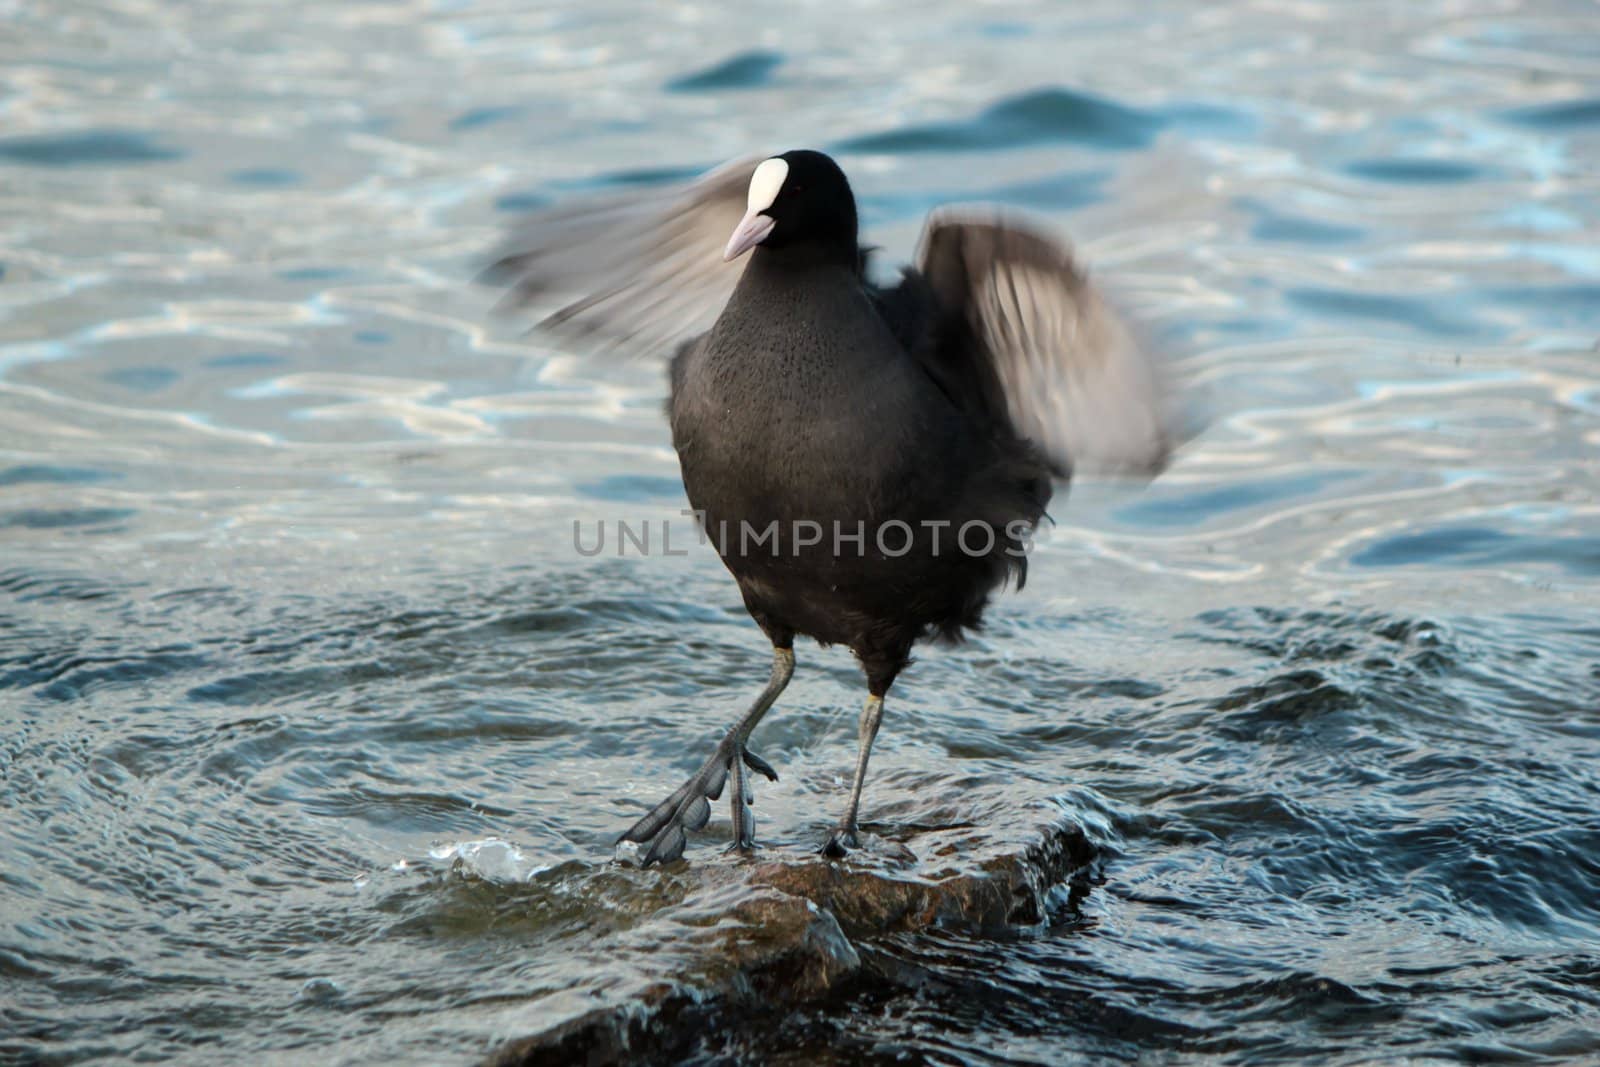 Coot duck standing on a stone in the lake and shaking its wings